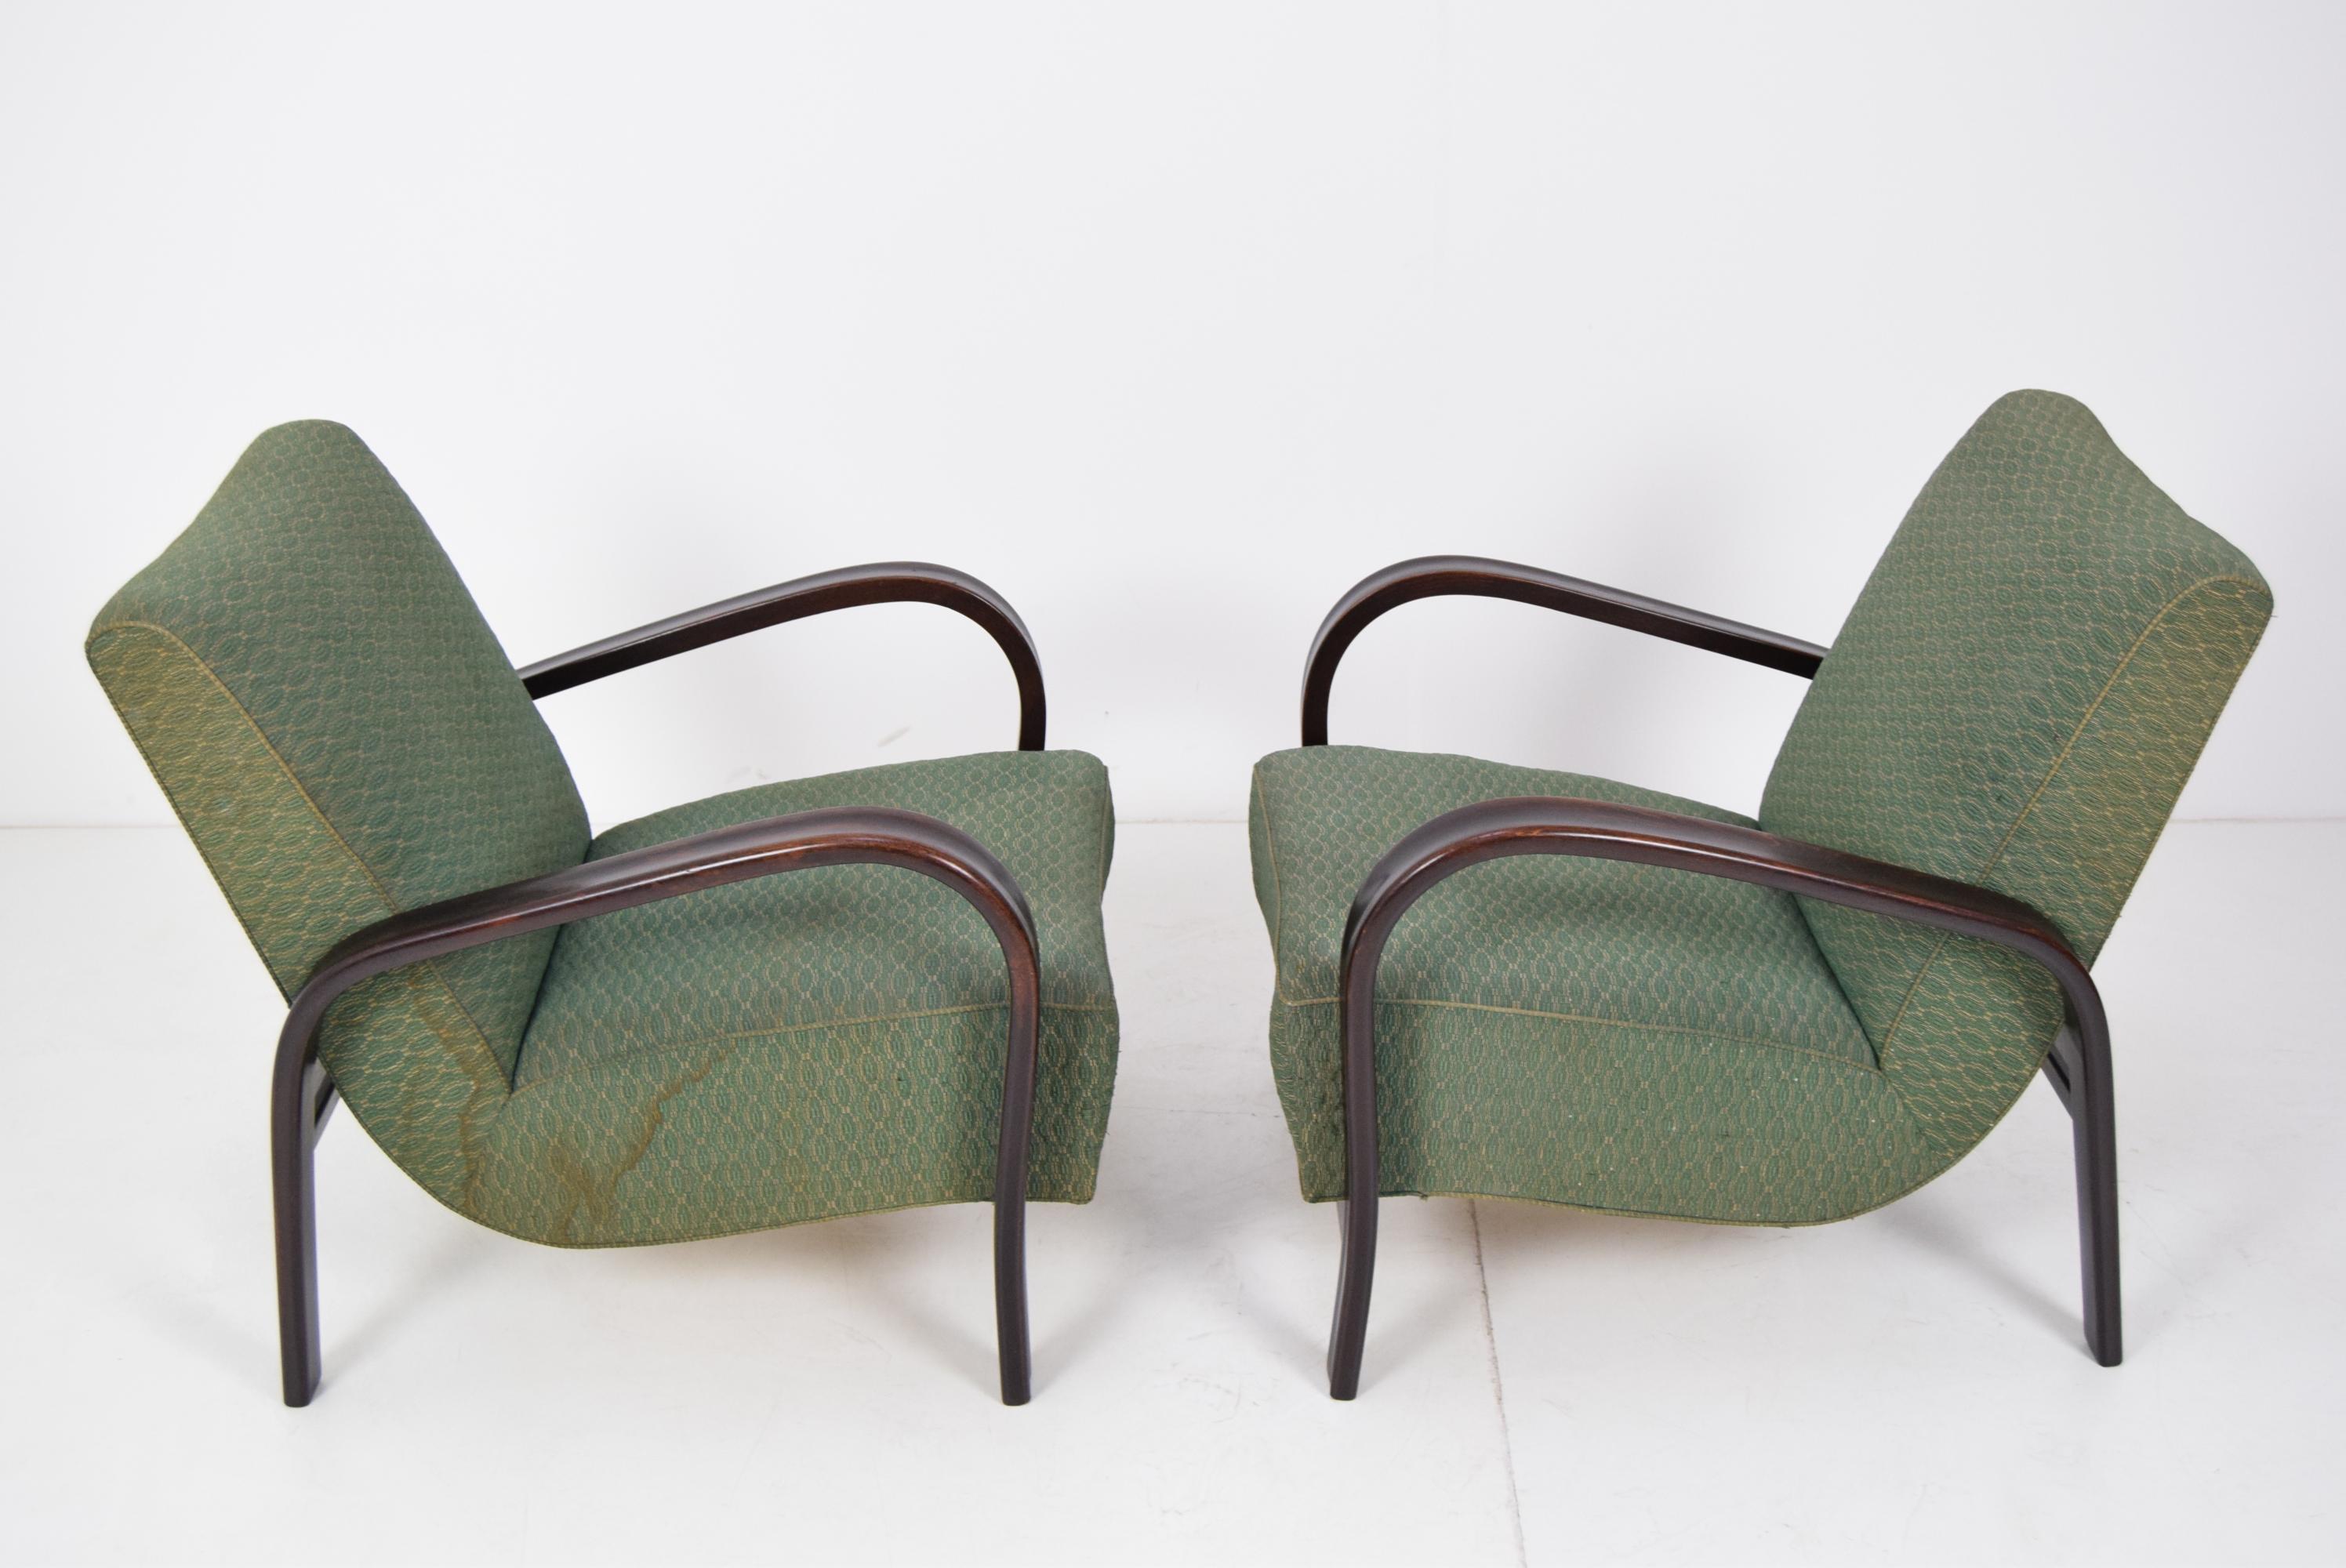 Czech Midcentury Pair of Design Armchairs by Arch. Kropacek and Kozelka, 1950s